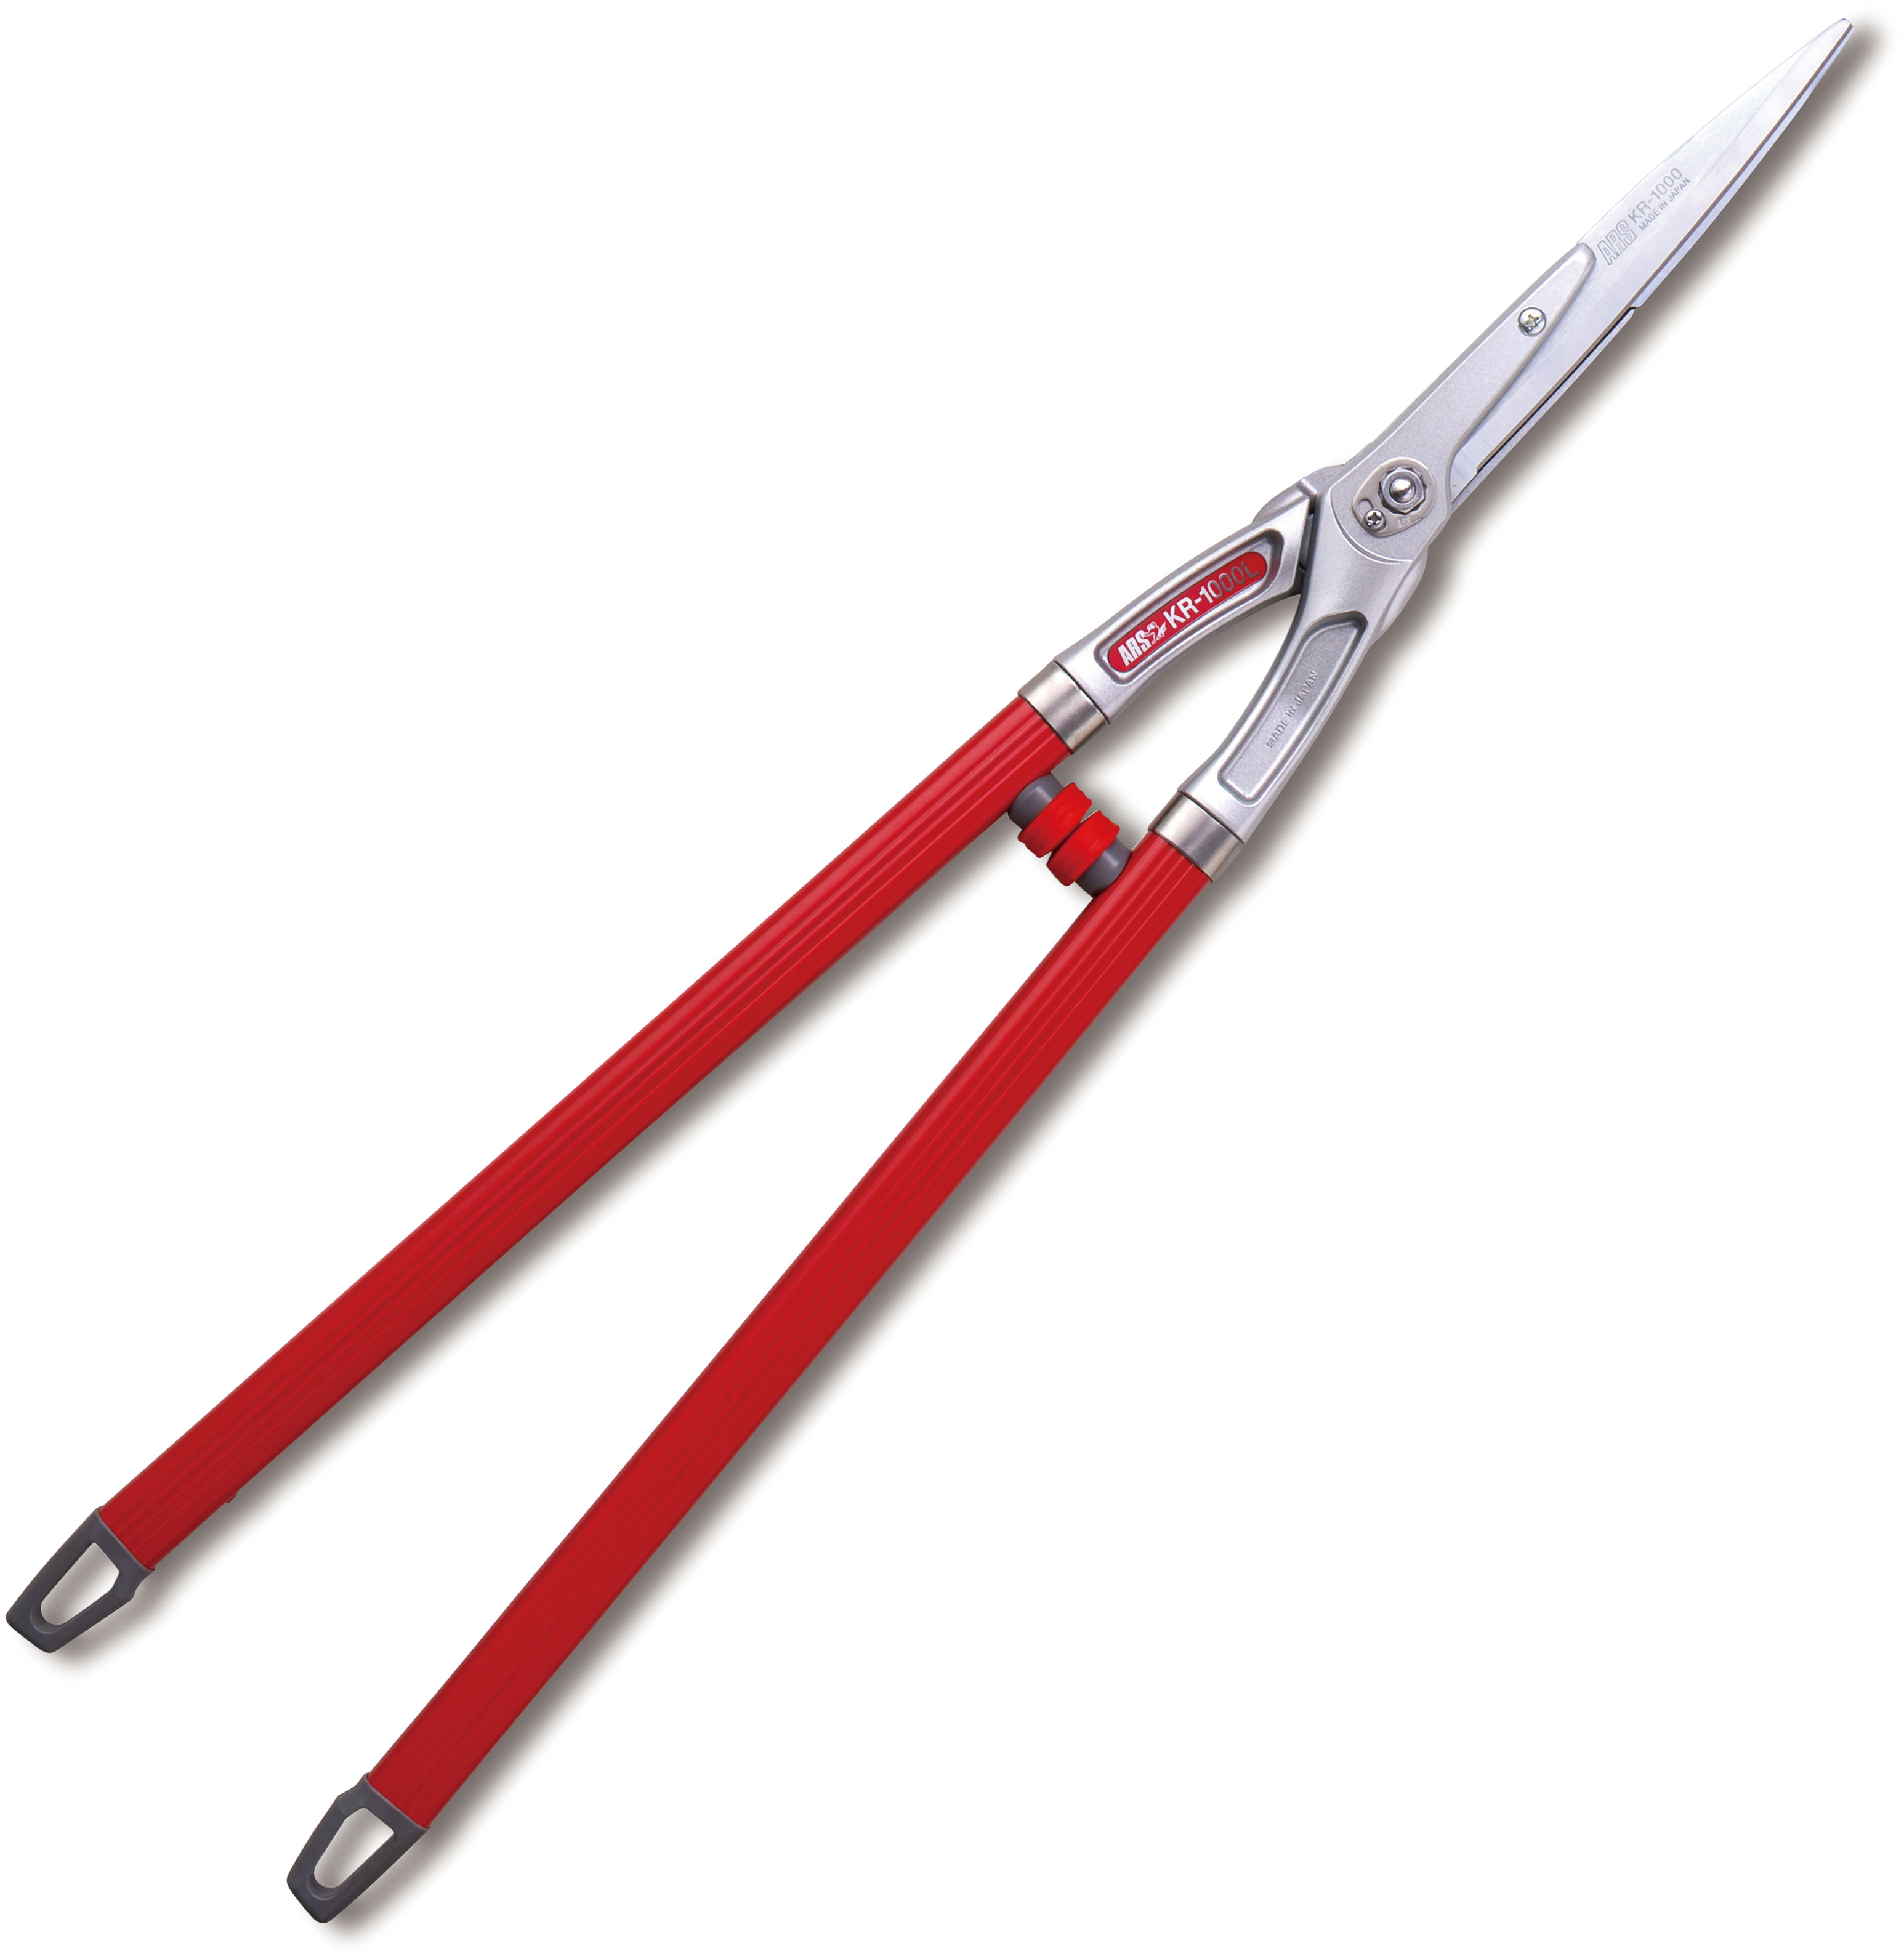 ARS KR-1000 Professional Hedge Shears for sale online 